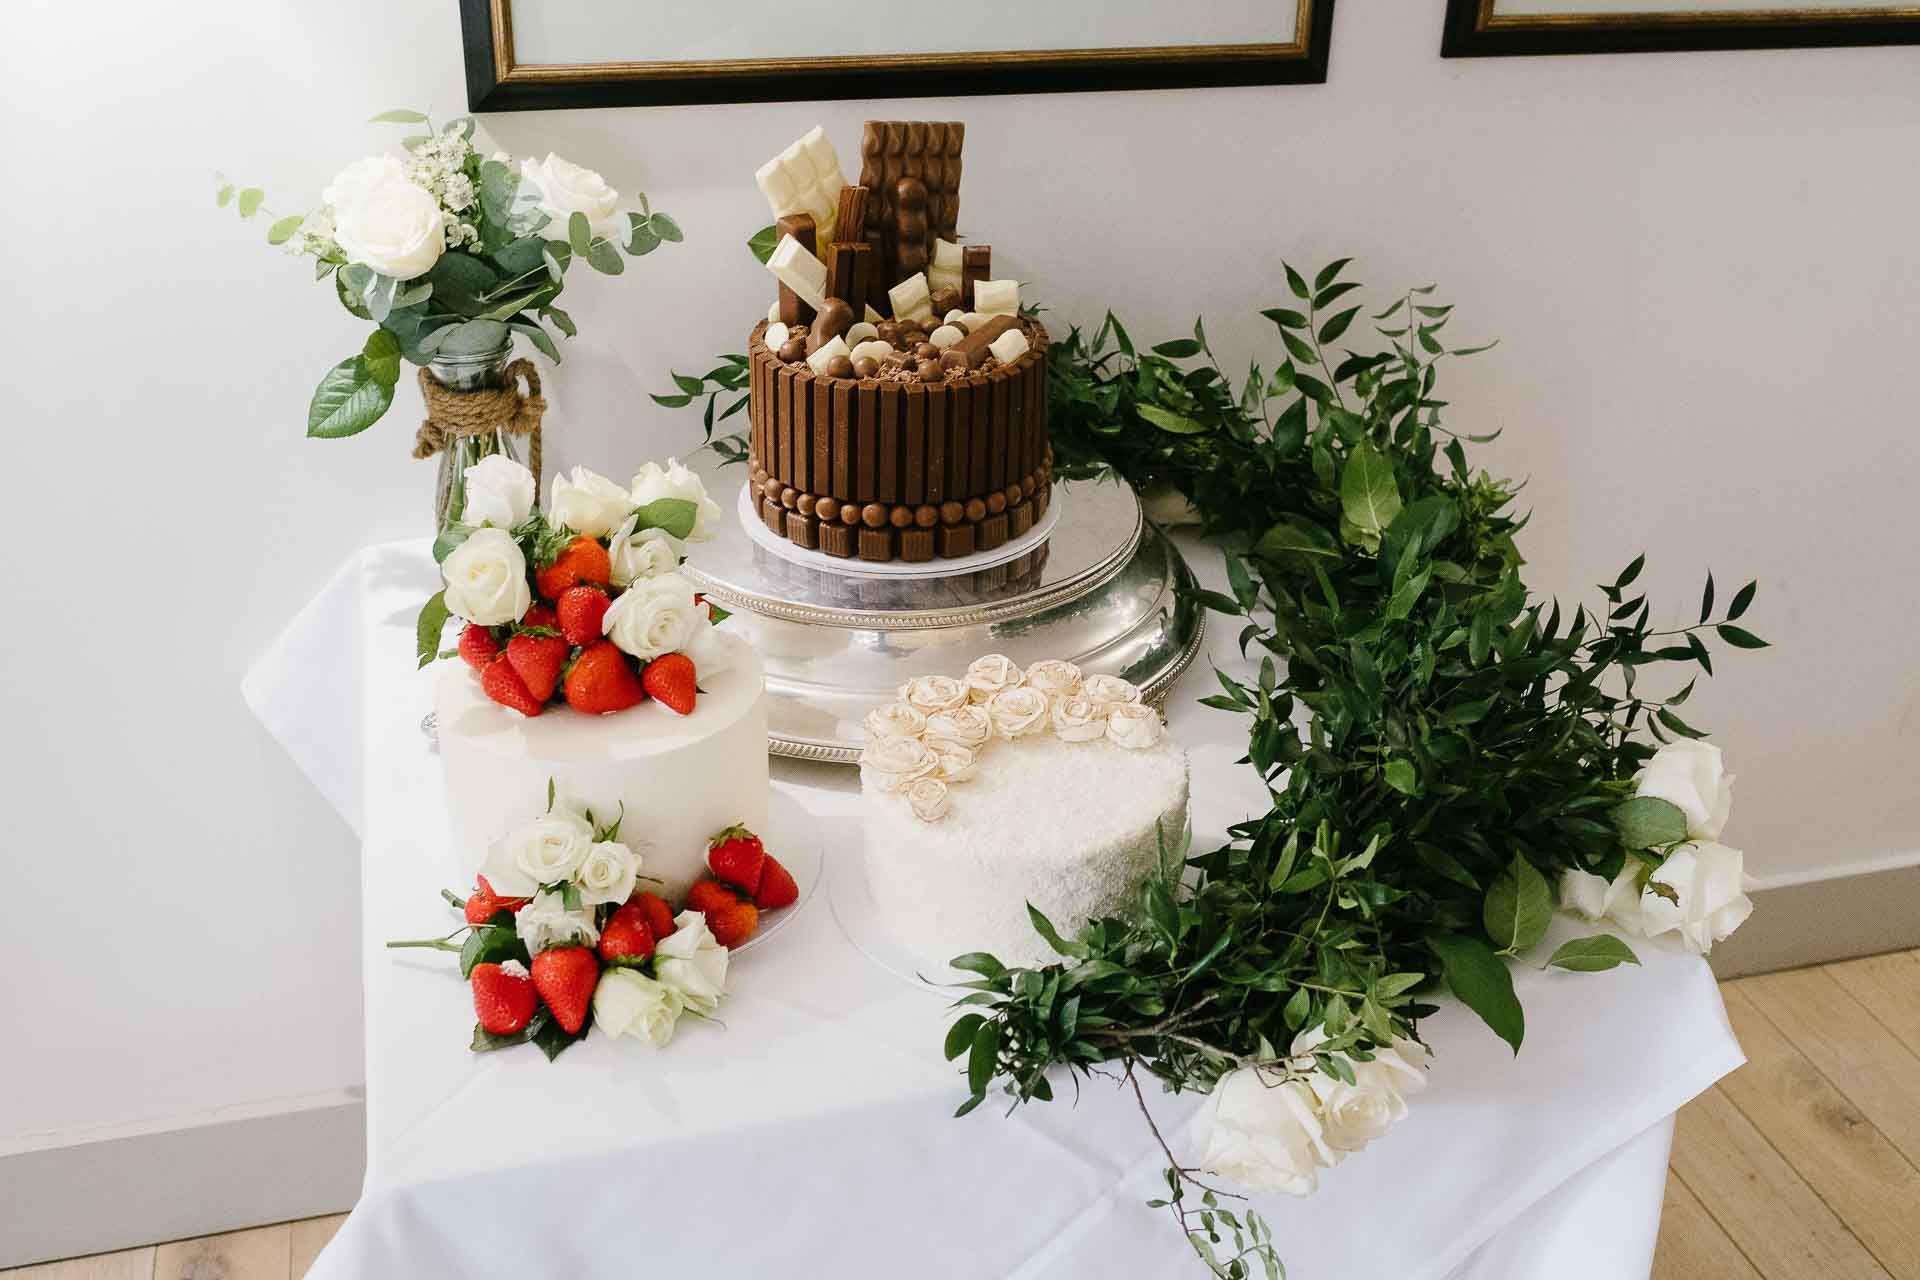 Three wedding cakes - chocolate, strawberry and passion fruit for Adrian and Nadia's wedding celebrations. Cakes created by Lea's Cakes & Bakes. Photography by Des Dubber Photography. Videography by Veiled Productions - Minster Mill wedding videographer